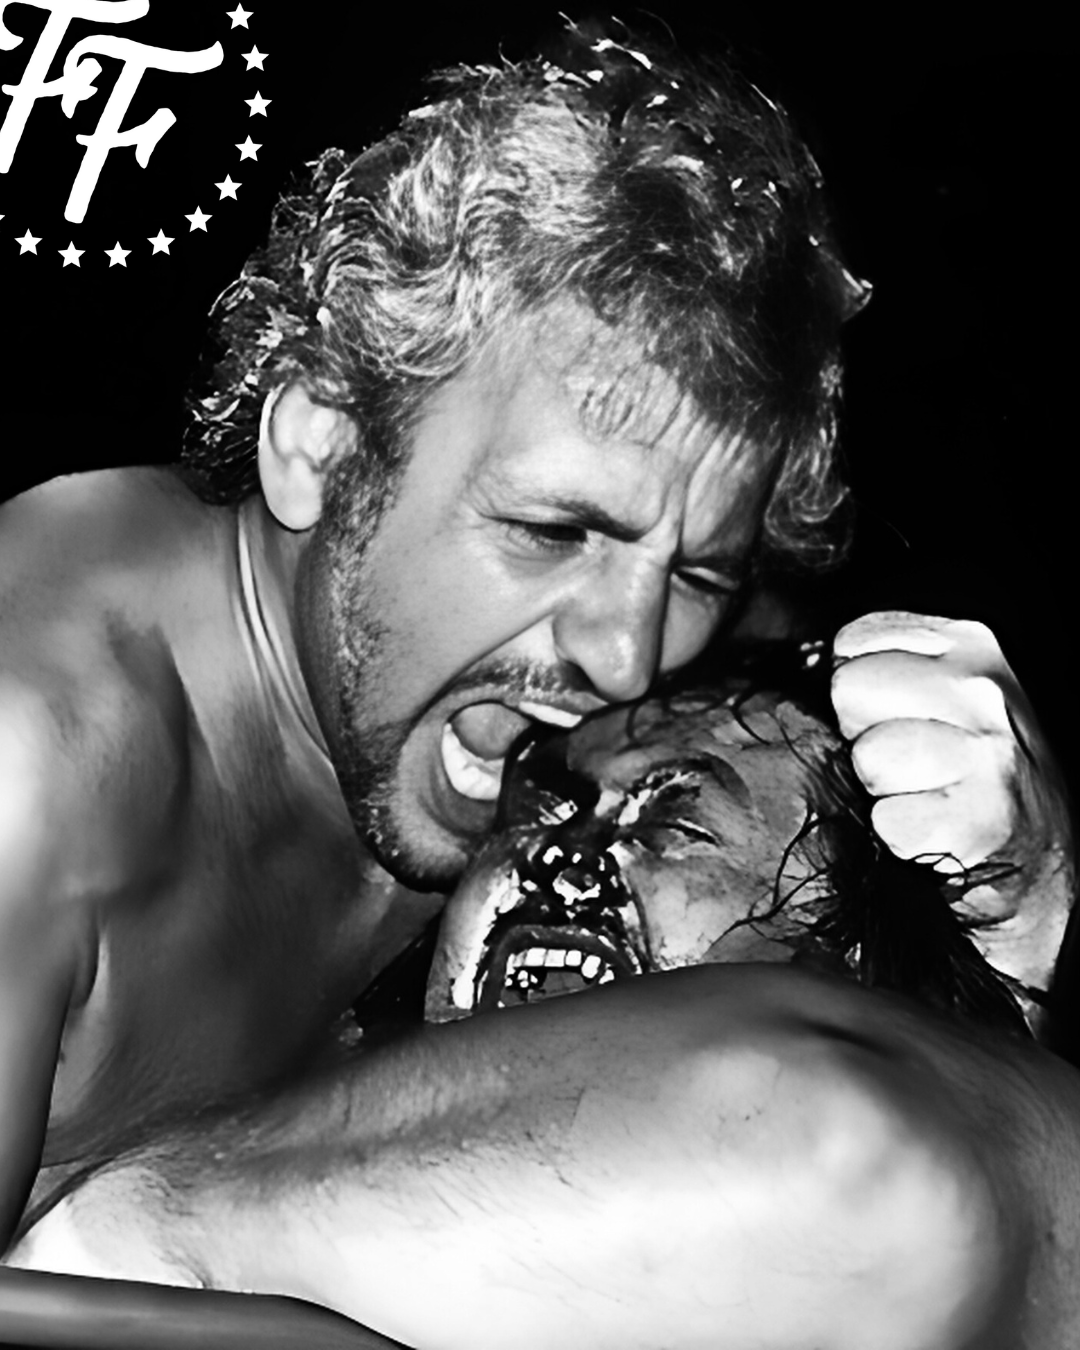 Blood and Fire: The Unbelievable Real-Life Story of Wrestling’s Original Sheik by Brian R. Solomon